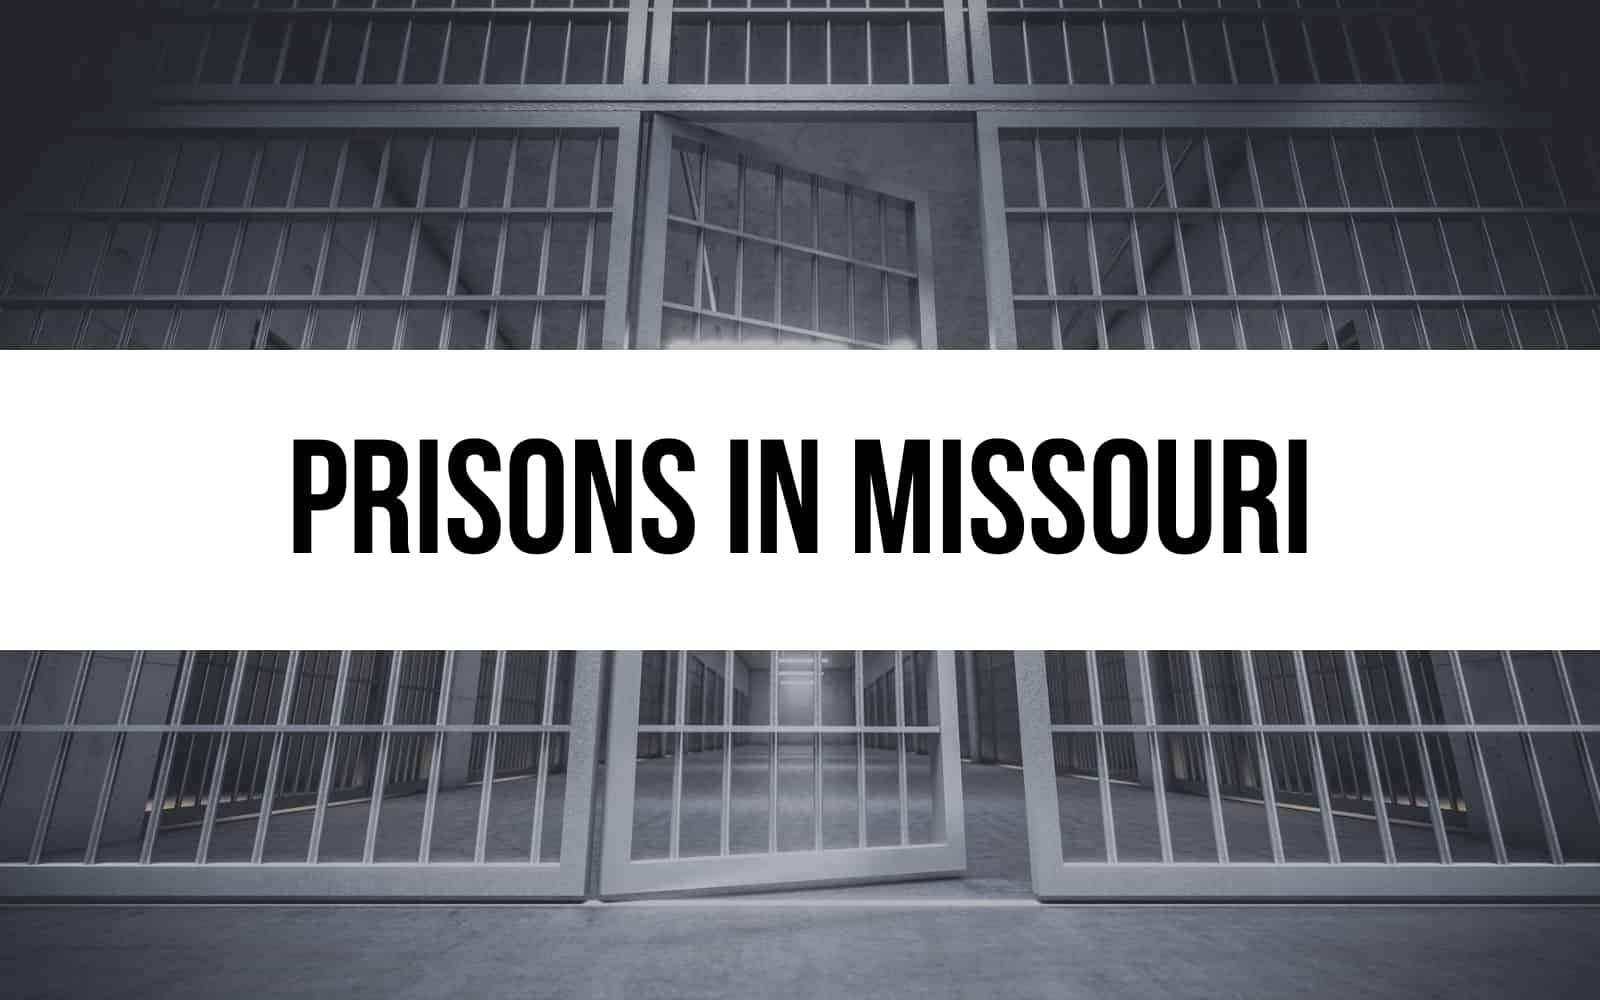 19 Prisons in Missouri: A Closer Look at the System